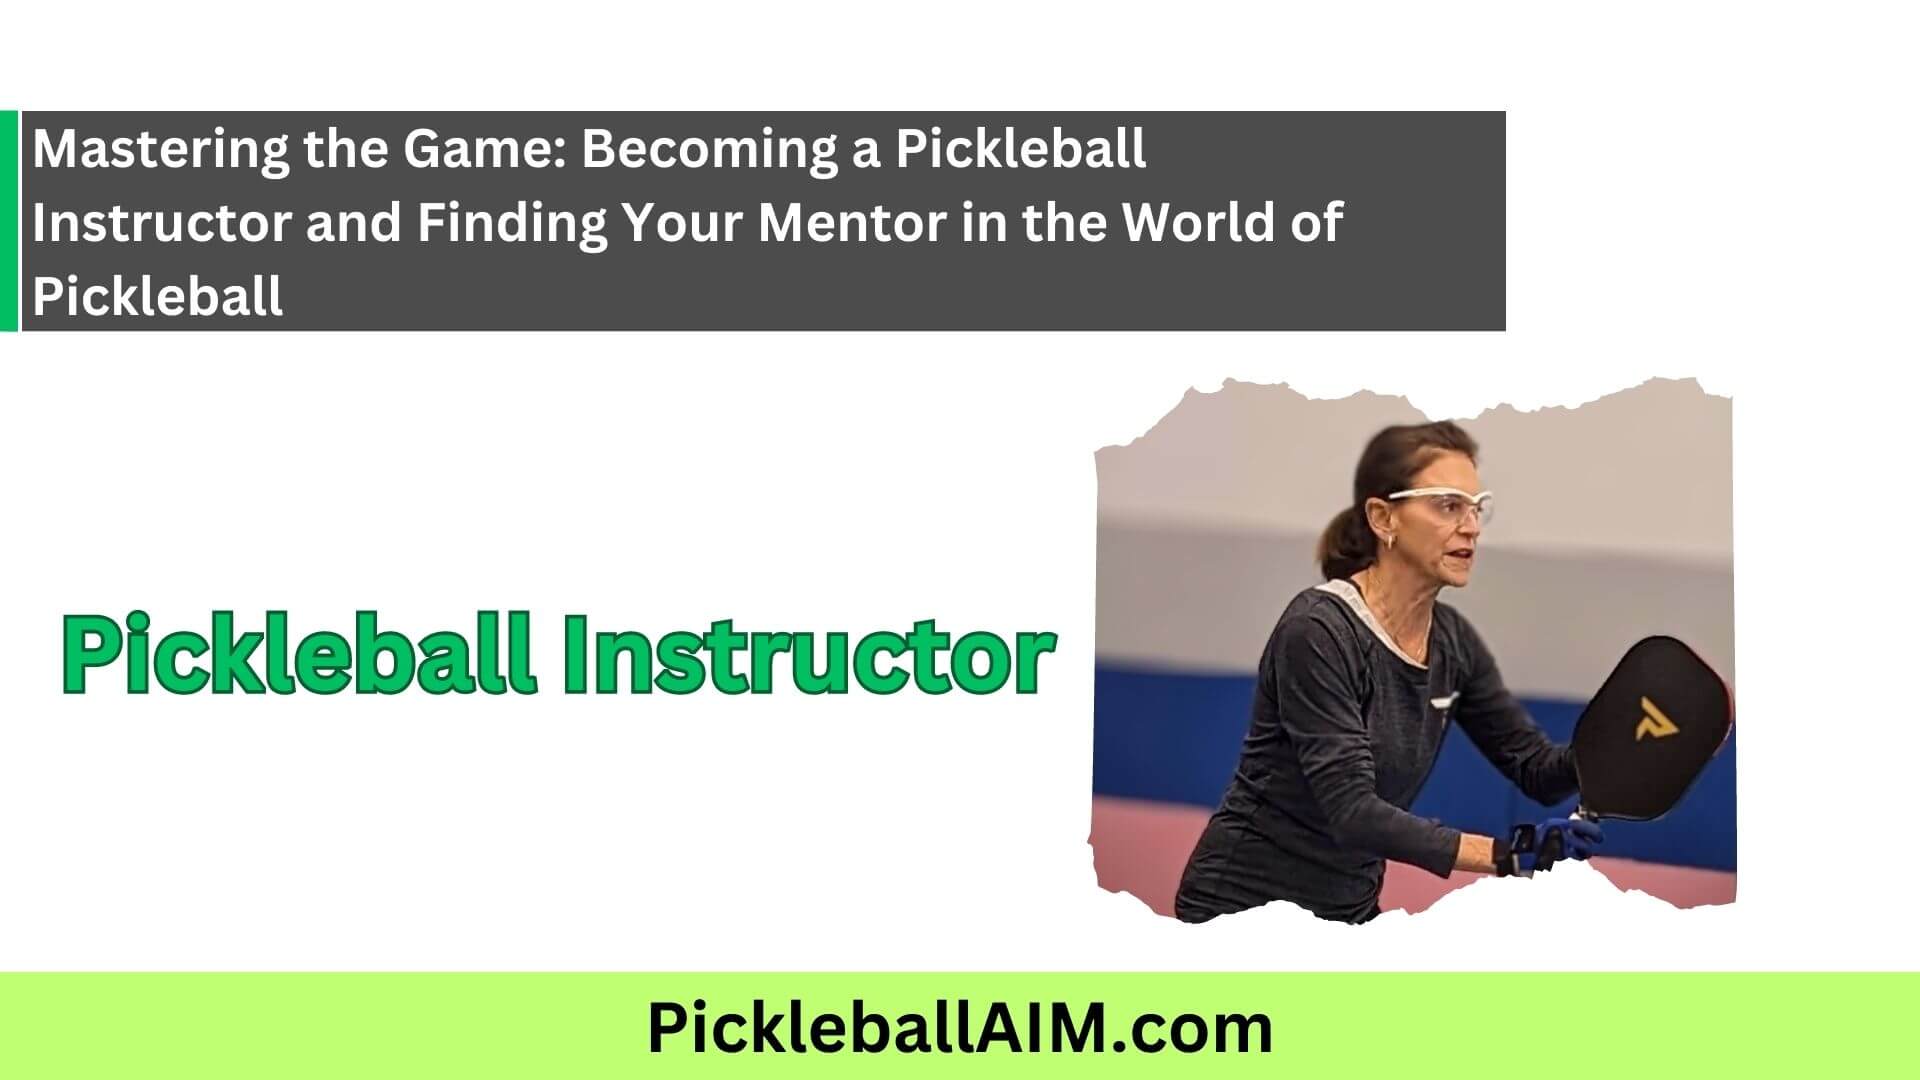 Become a Pickleball Instructor A Comprehensive Guide to Finding and Cultivating Your Teaching Expertise